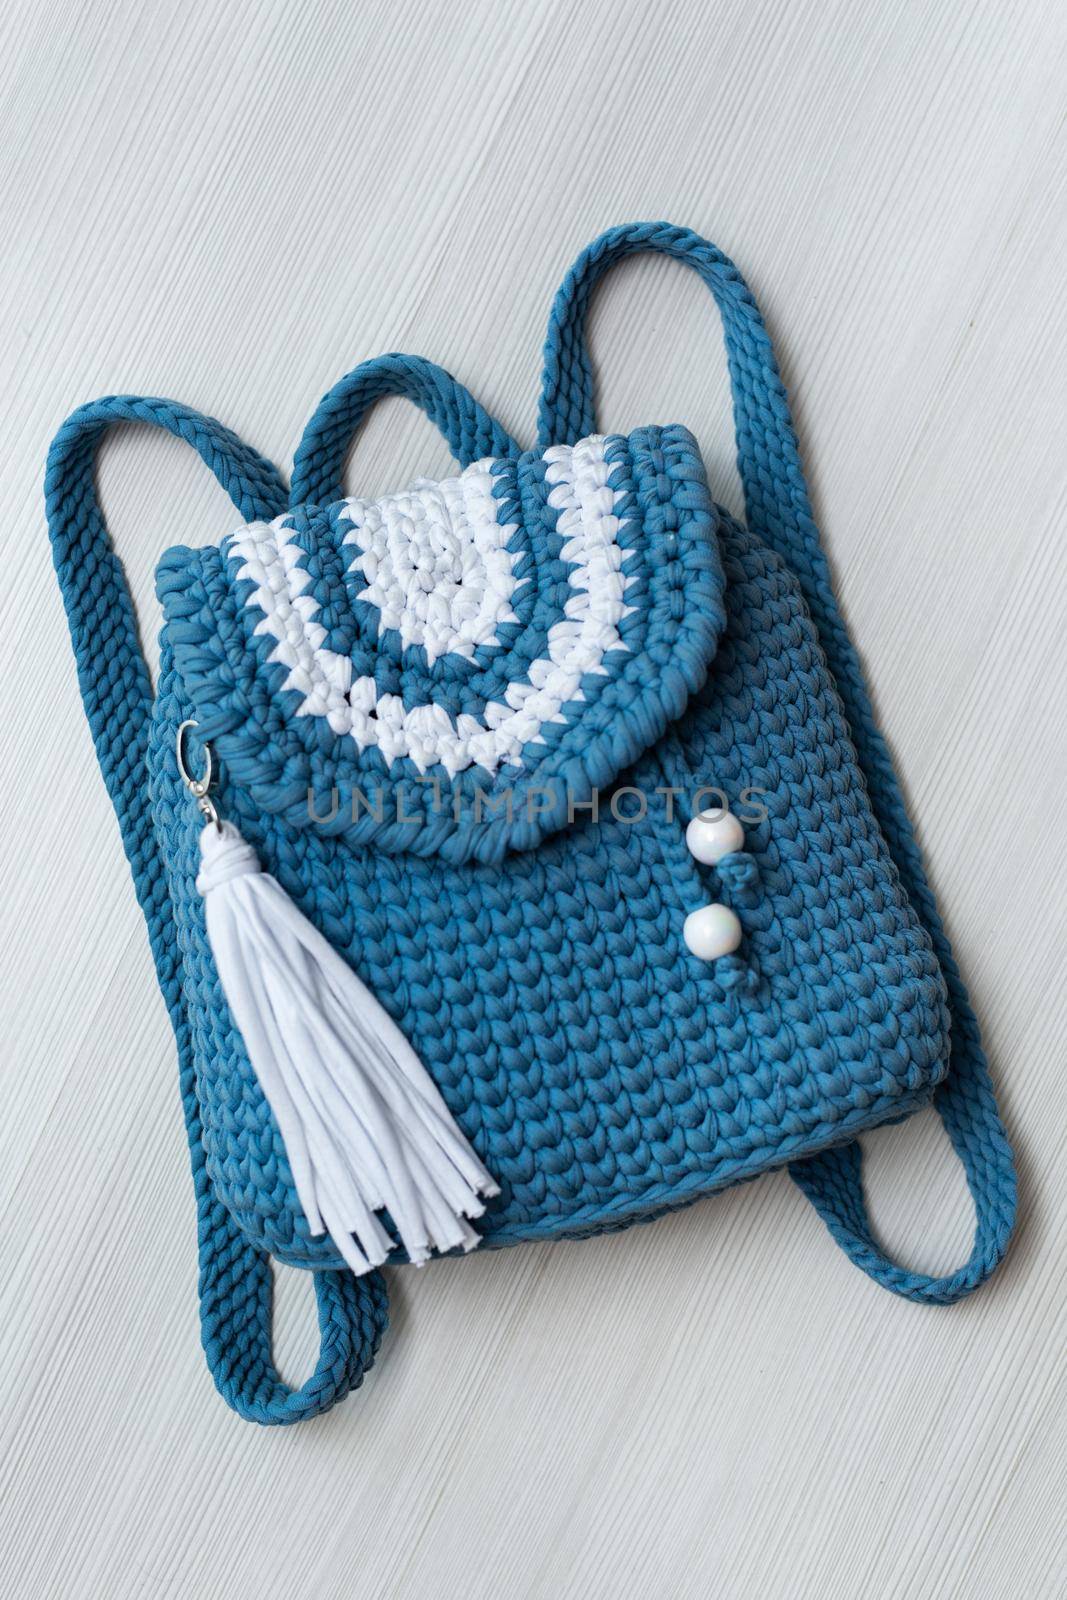 Small knitted blue backpack on a white background. by StudioPeace